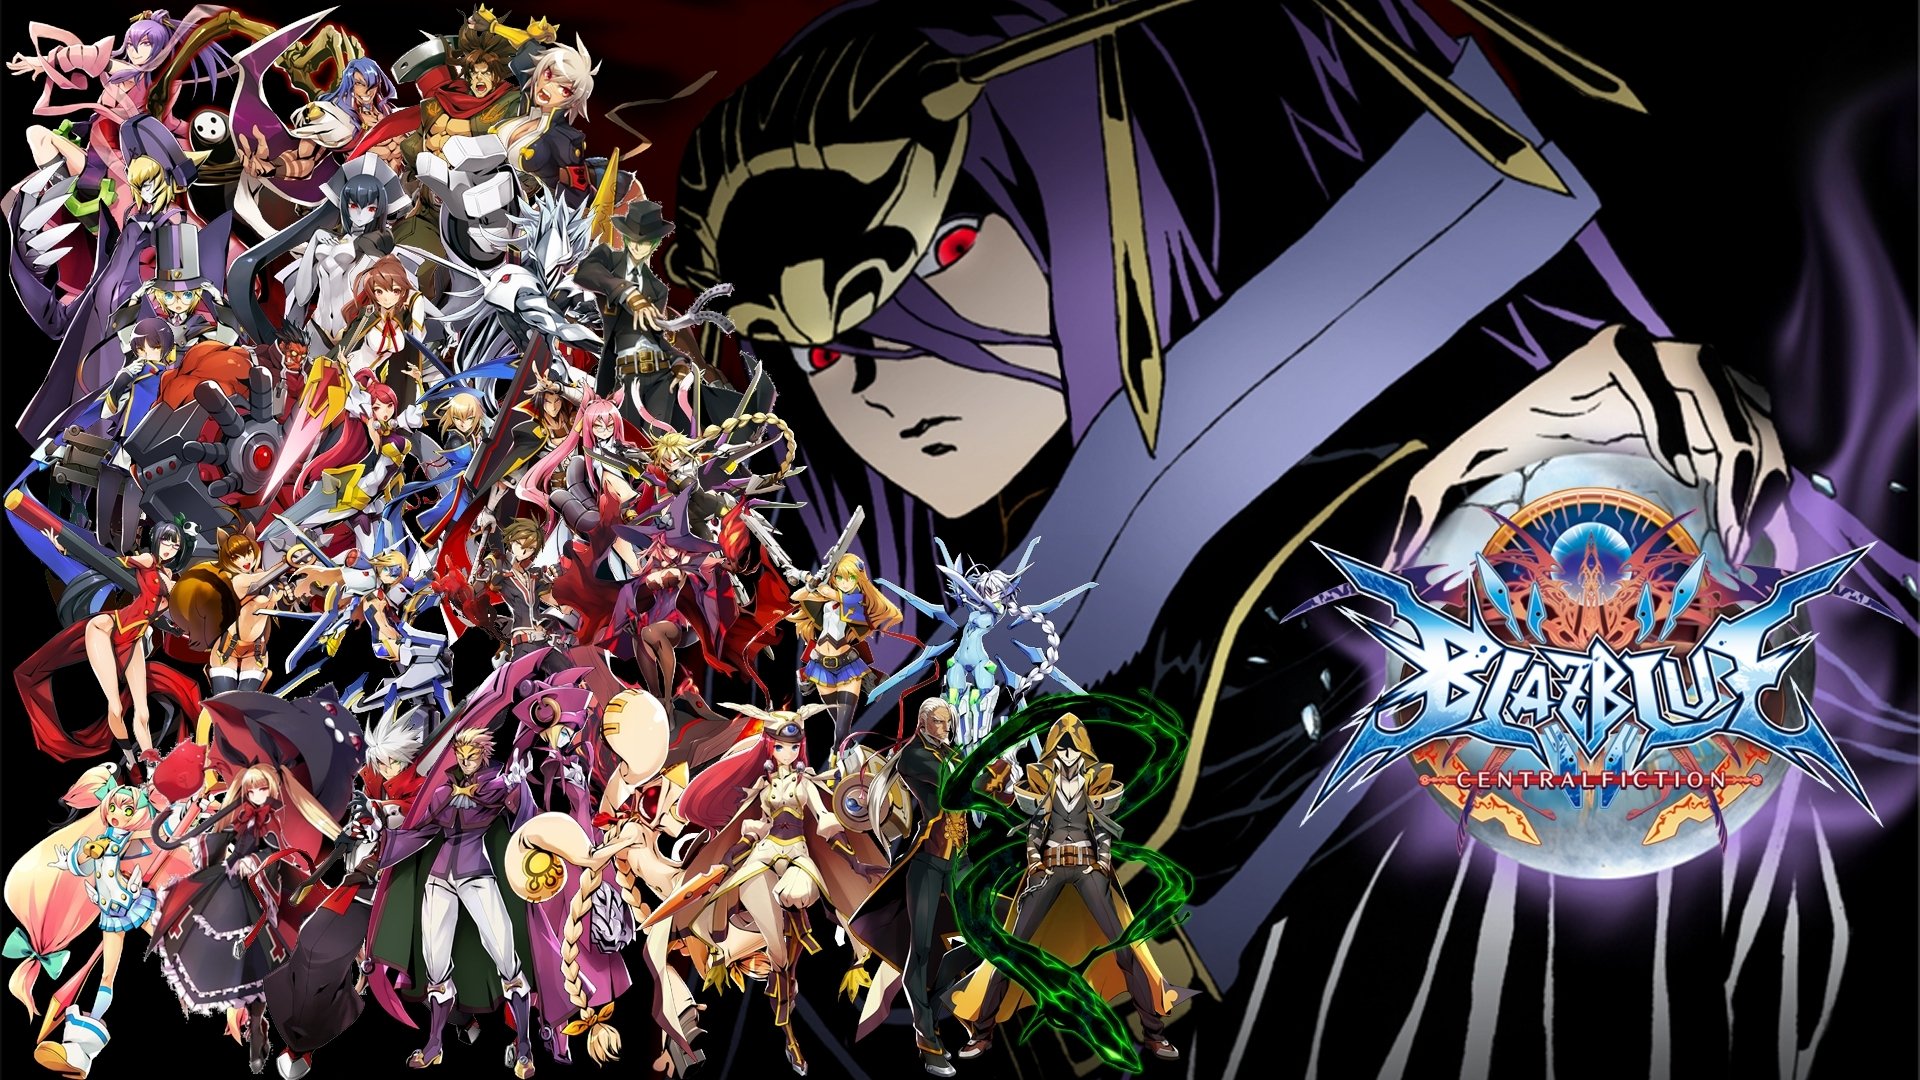 18 Blazblue Centralfiction Hd Wallpapers Background Images Wallpaper Abyss